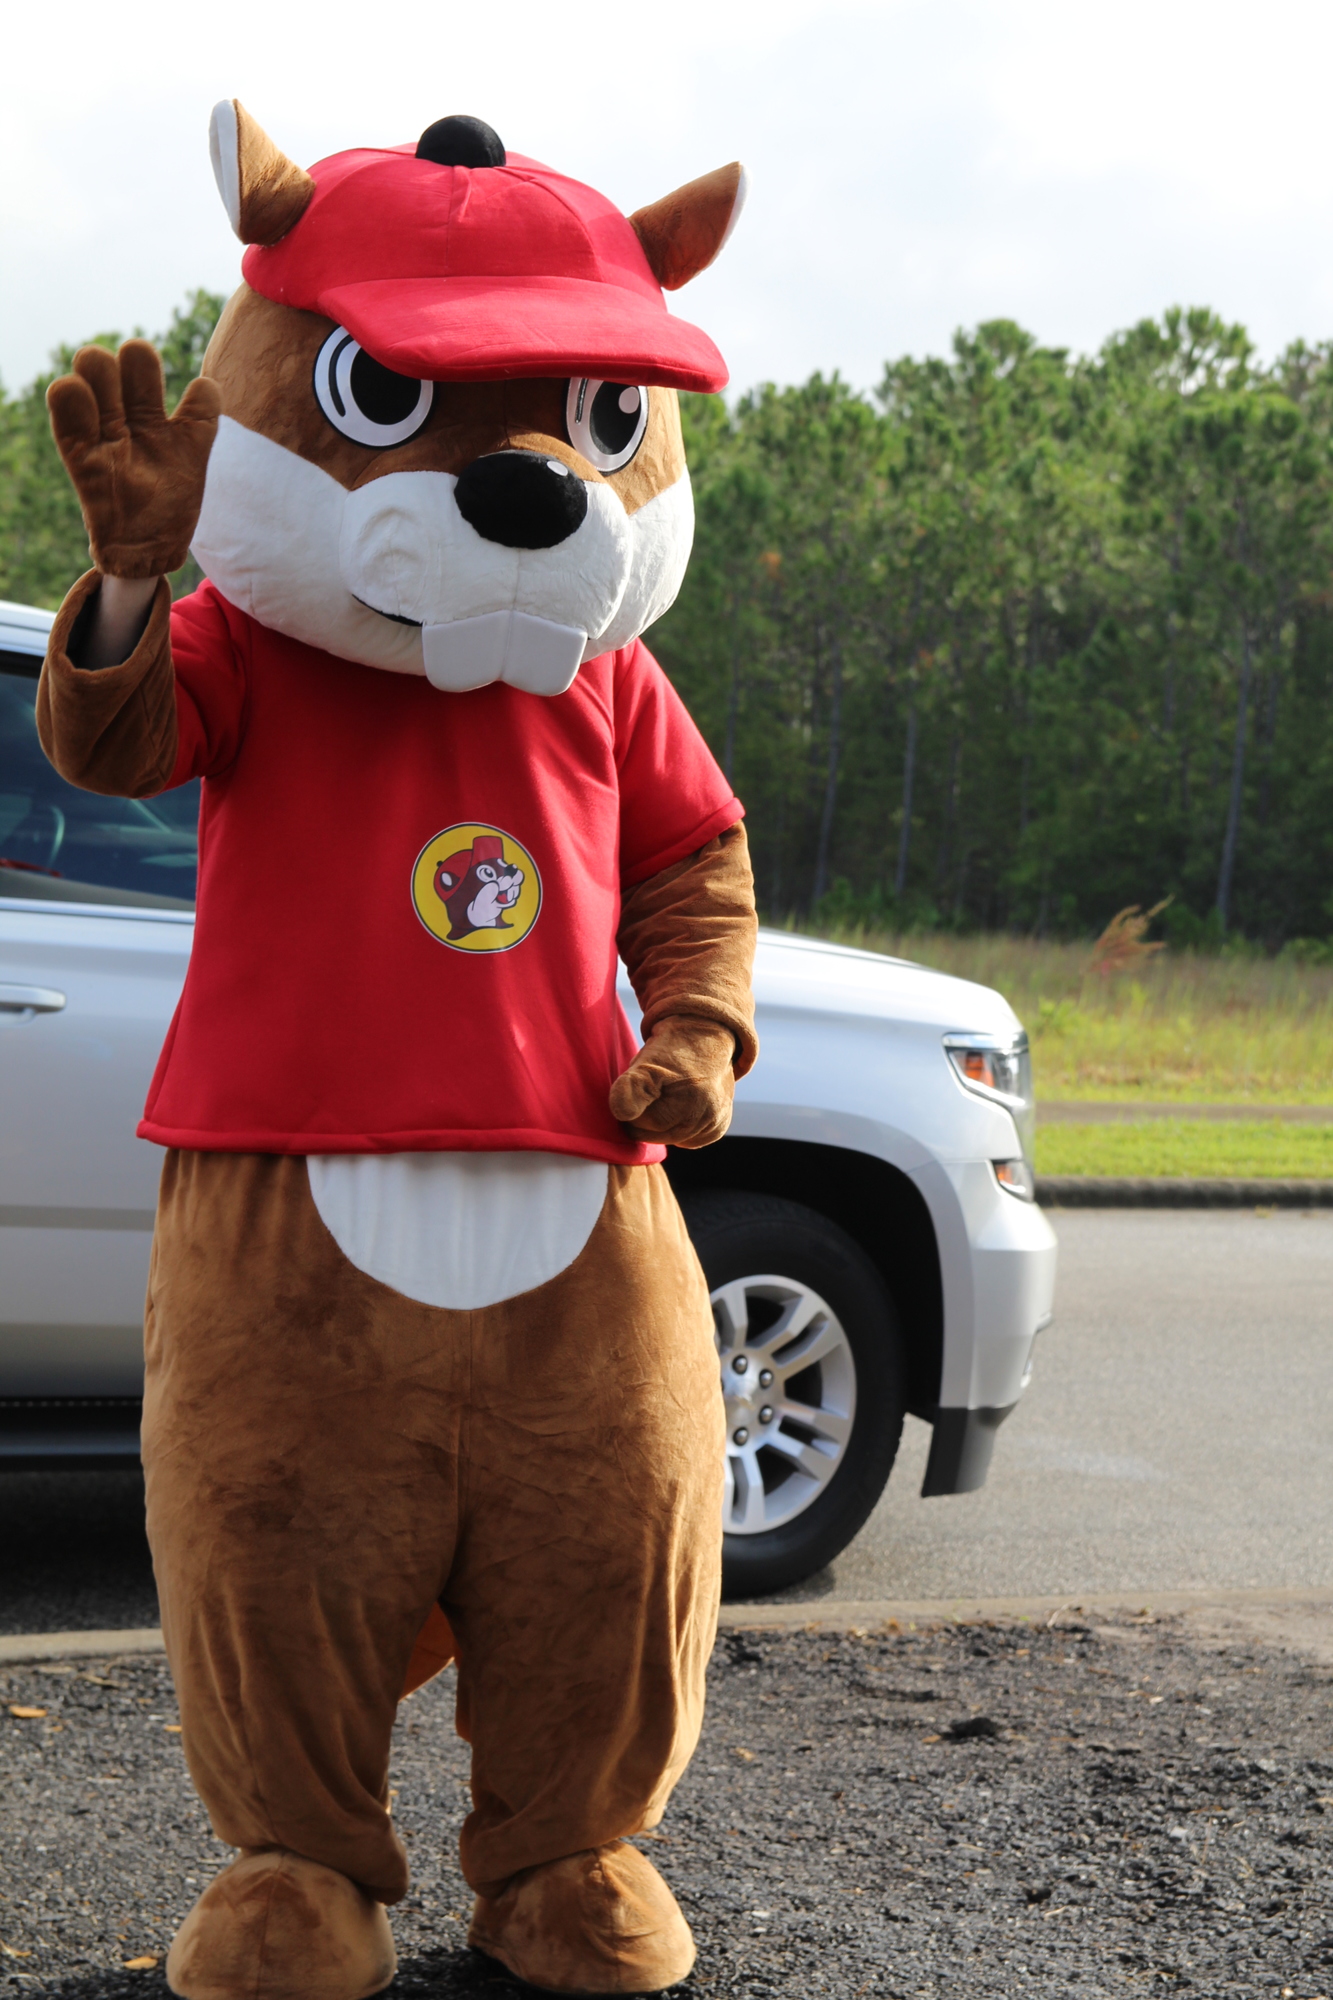 Mascot Buc-ee Beaver was on hand to lend support to the new travel center. Photo by Tanya Russo